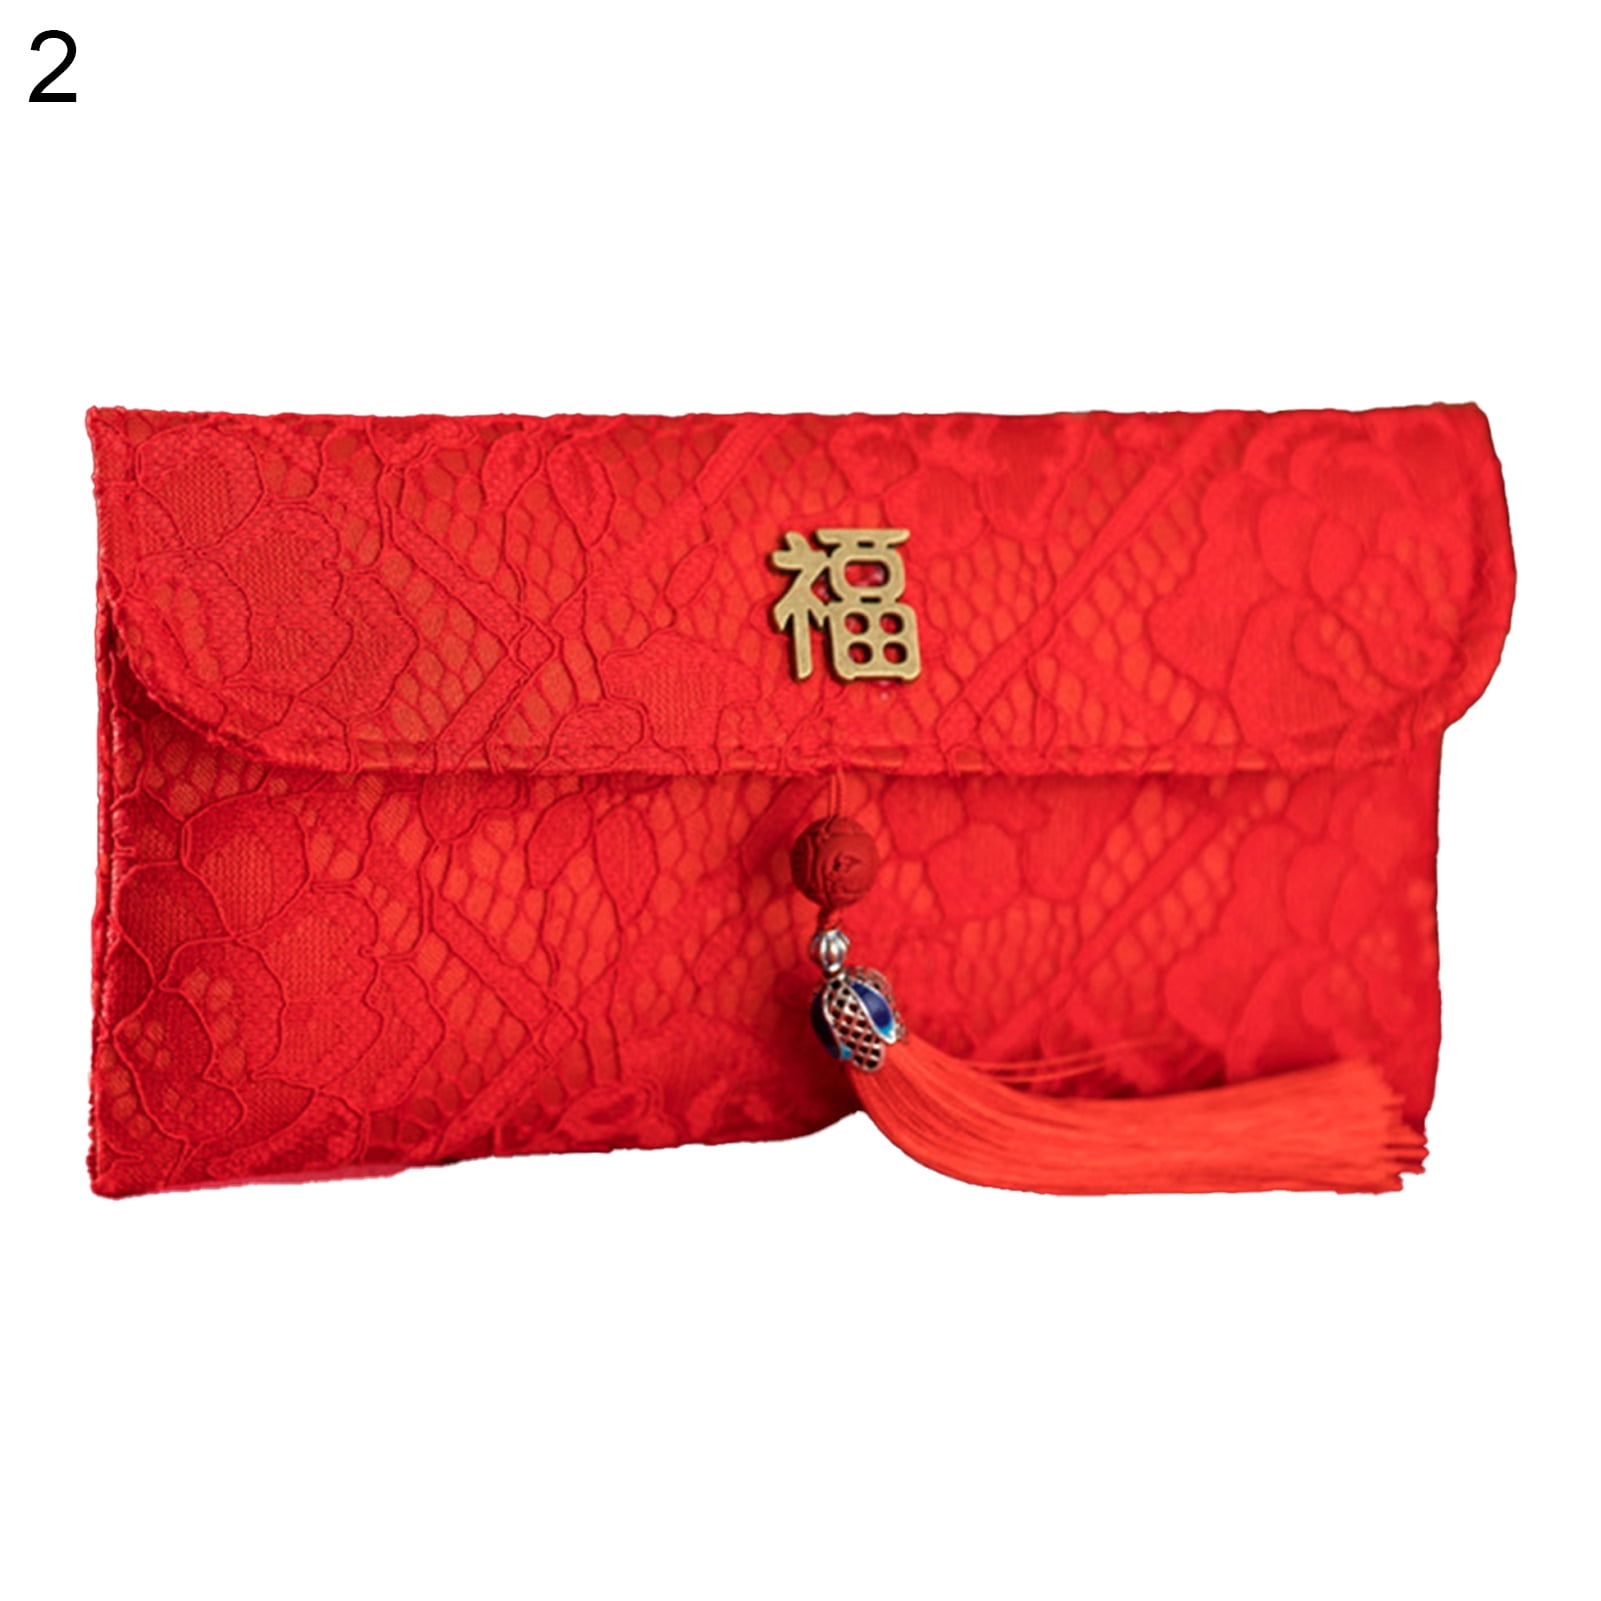 PRINTING SPRING FESTIVAL Red Envelopes Lucky Purse Red Purs New Year Bag  $4.06 - PicClick AU